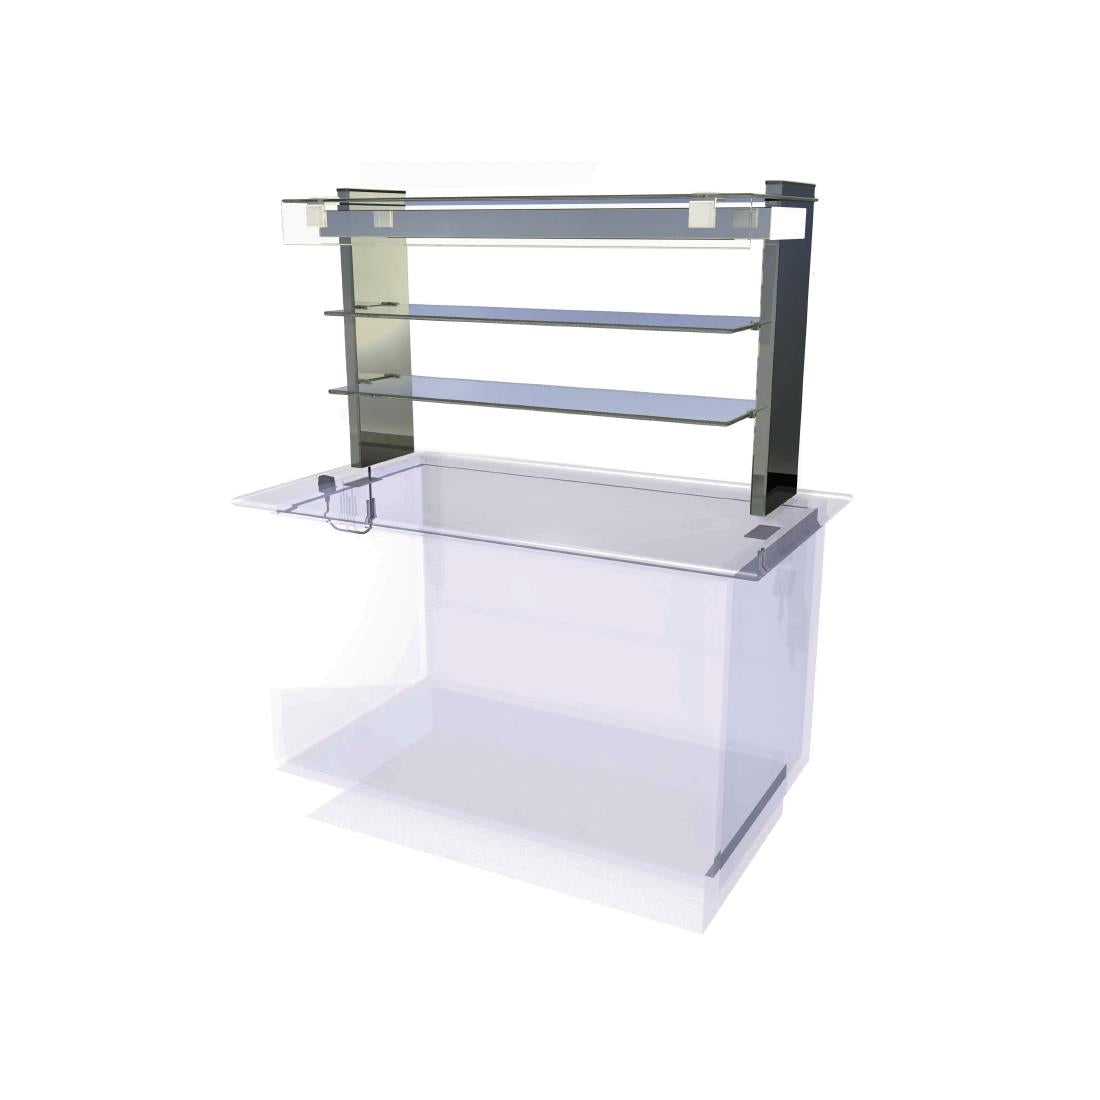 CW624 Kubus Drop In Ambient Multi Level Display KAMG4 JD Catering Equipment Solutions Ltd